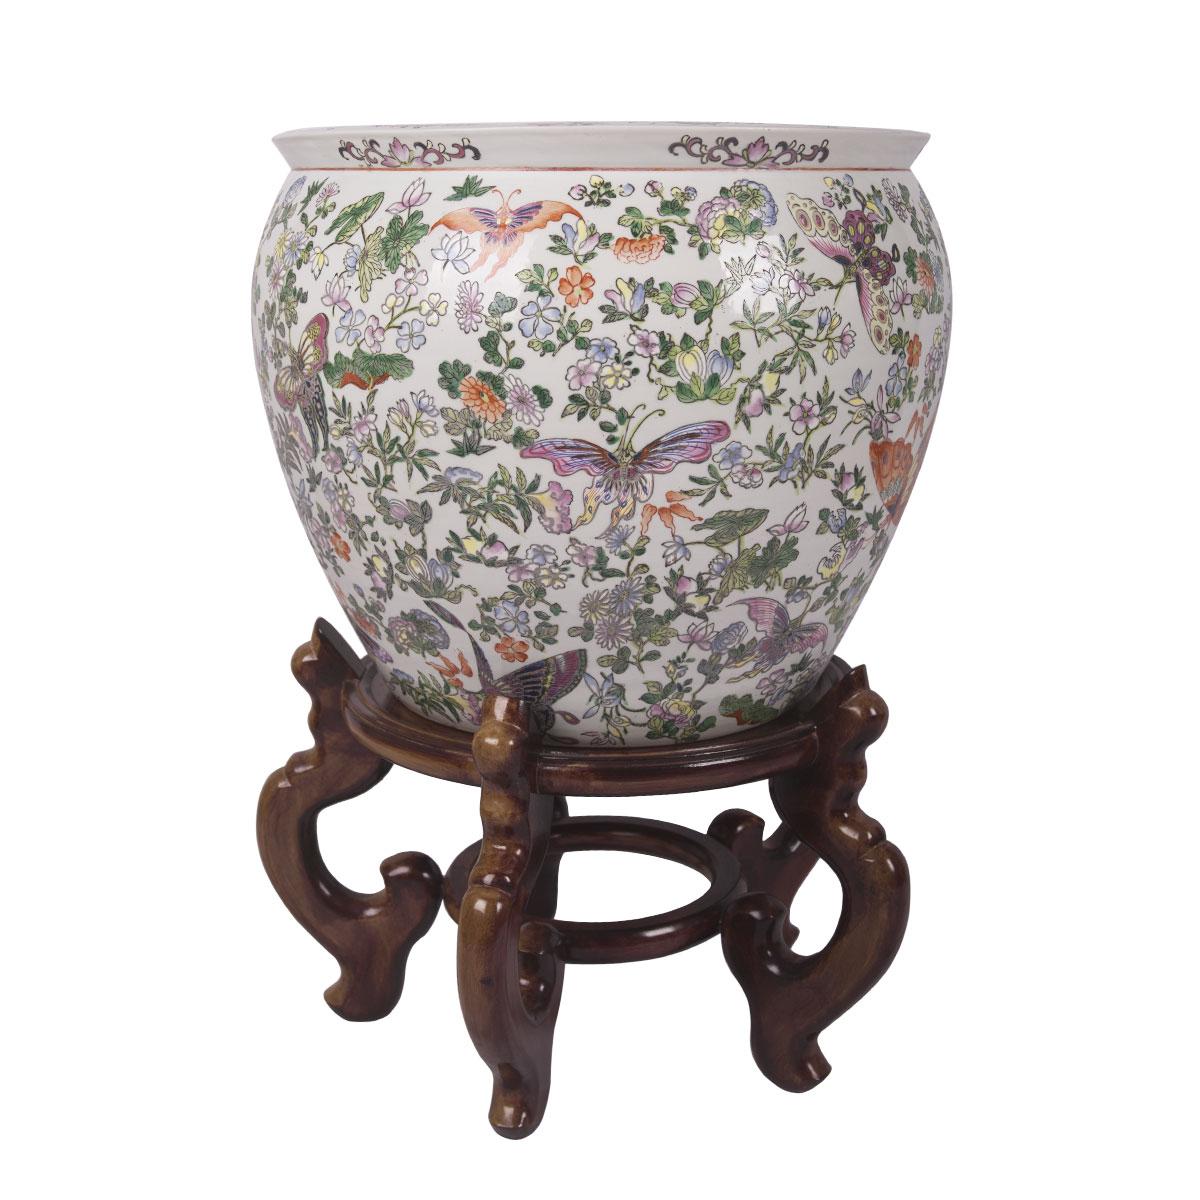 These colorful matching fishbowls were created in Hong Kong, China around 1960. Both fish bowls are round in shape, these porcelain bowls features beautiful hand painted butterflies and flowers throughout the exterior of these large fish bowls. The